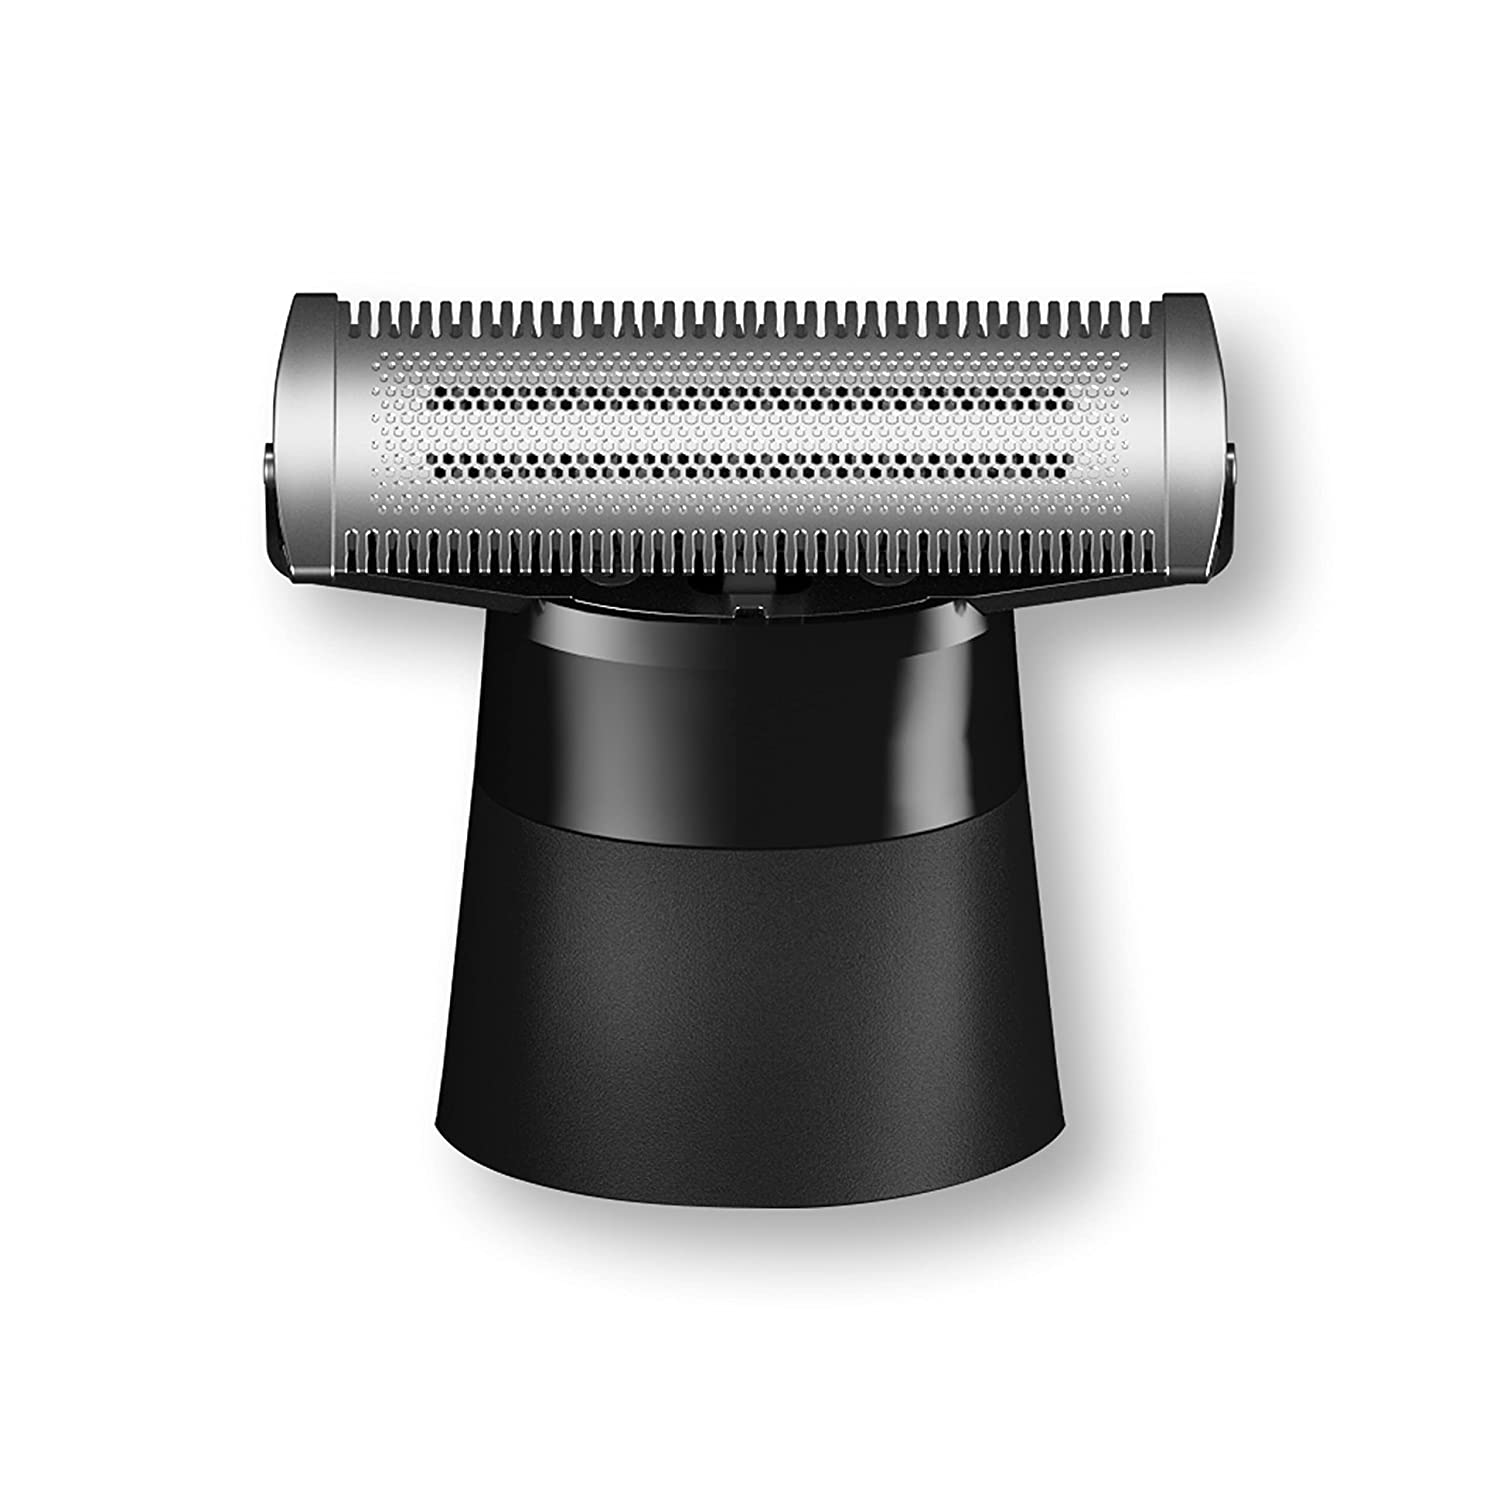 Braun X-Series Replacement Blade Compatible With Braun X-Series Models Beard Trimmer & Electric Shaver